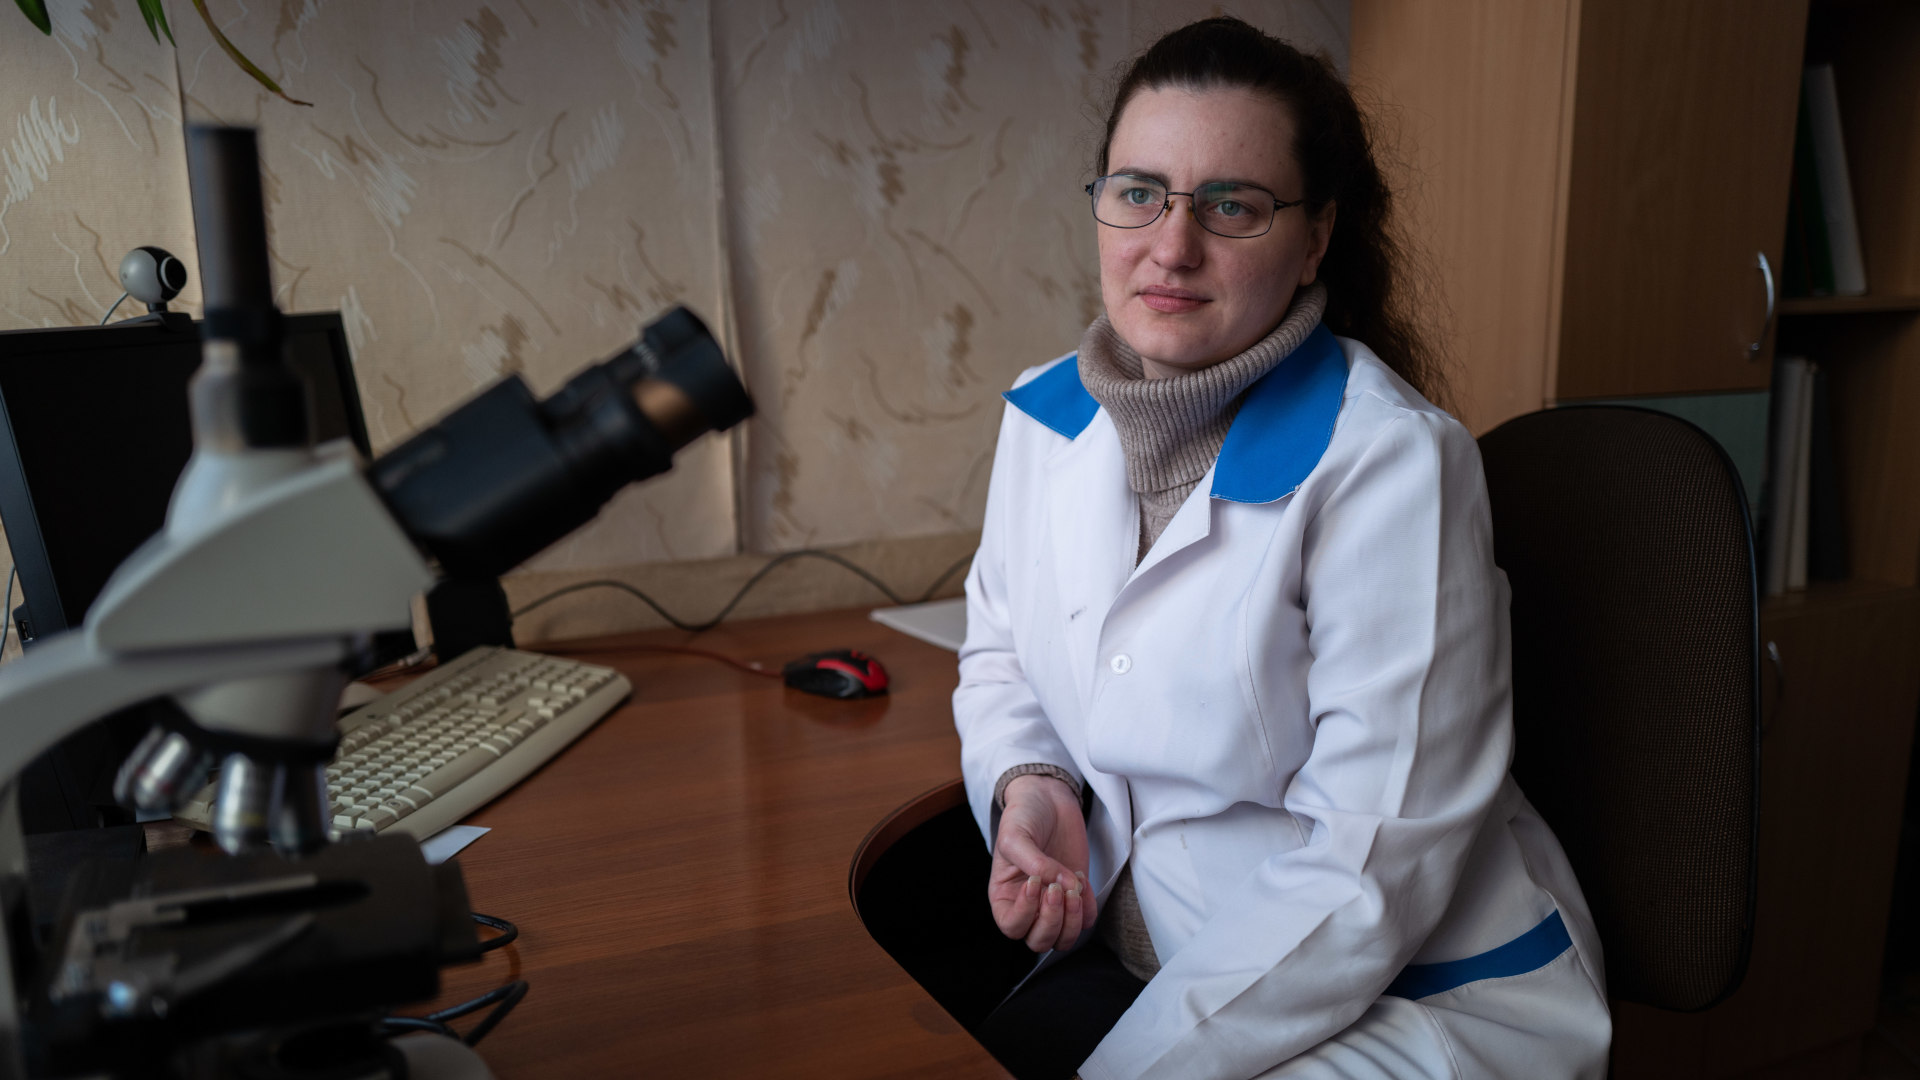 Yana Hvozdiuk is a scientist at the Institute for Problems of Cryobiology
and Cryomedicine of the National Academy of Sciences of Ukraine, in Kharkiv. Despite the ongoing war, Hvozdiuk plans to continue her work in Ukraine. | All photos by KERN HENDRICKS for UNDARK